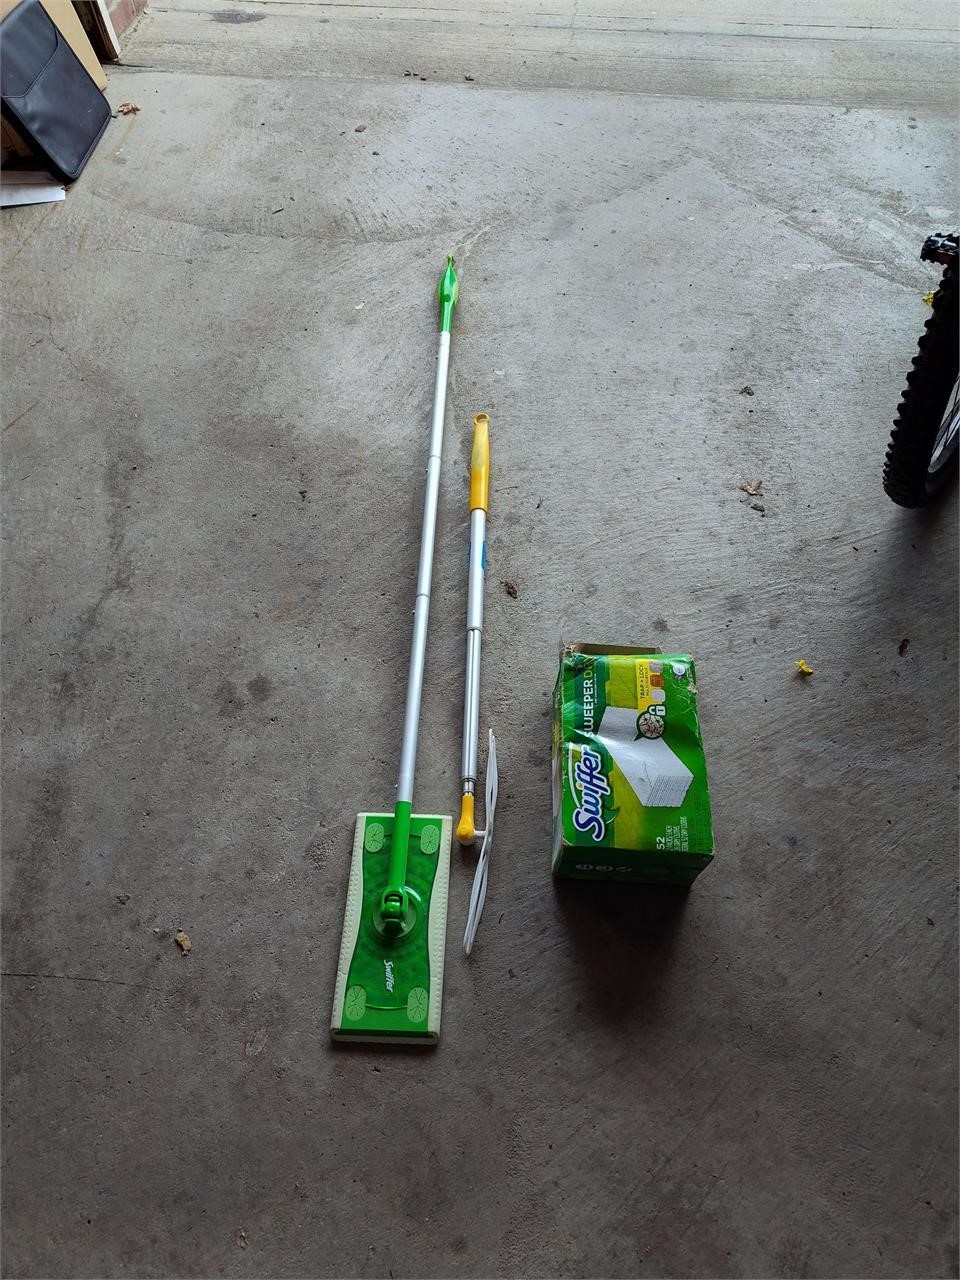 Swiffer w/ Open Box of Pads and Duster